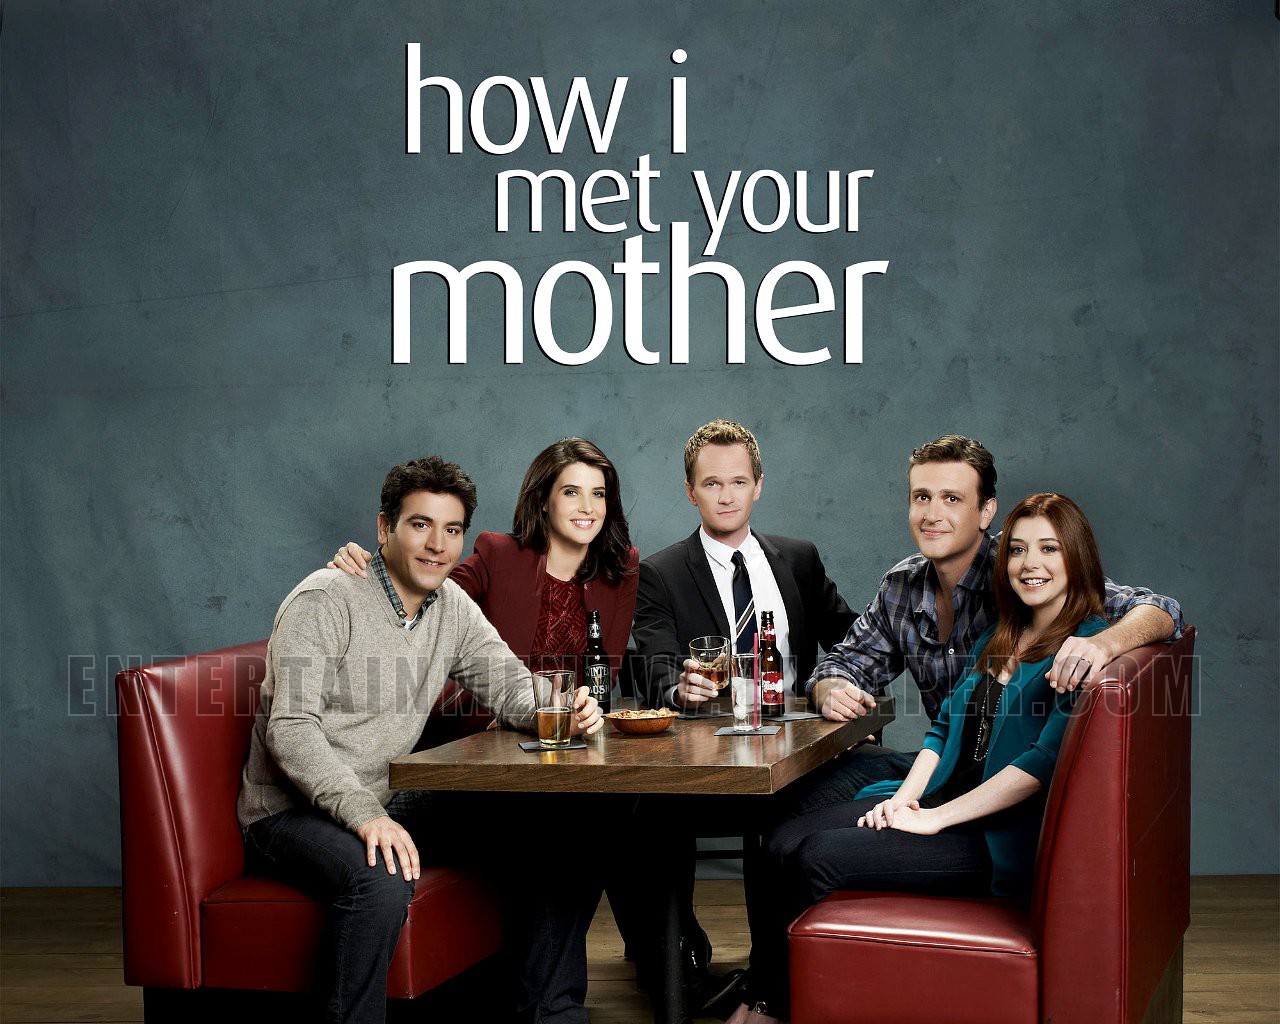 How I Met Your Mother Wallpaper Just Good Vibe